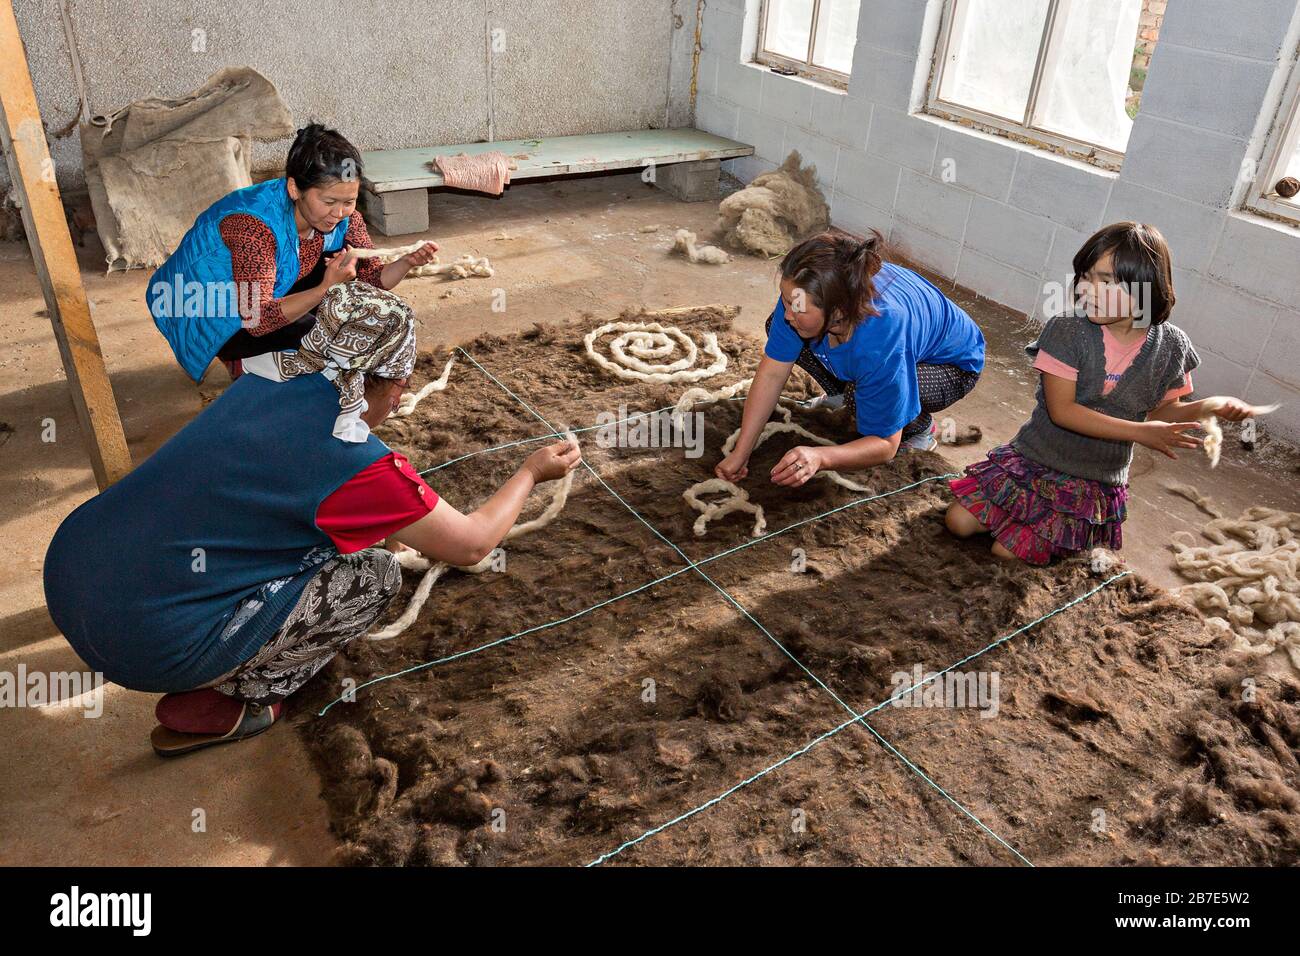 Local people making felt carpet in traditional way, in Issyk Kul, Kyrgyzstan Stock Photo